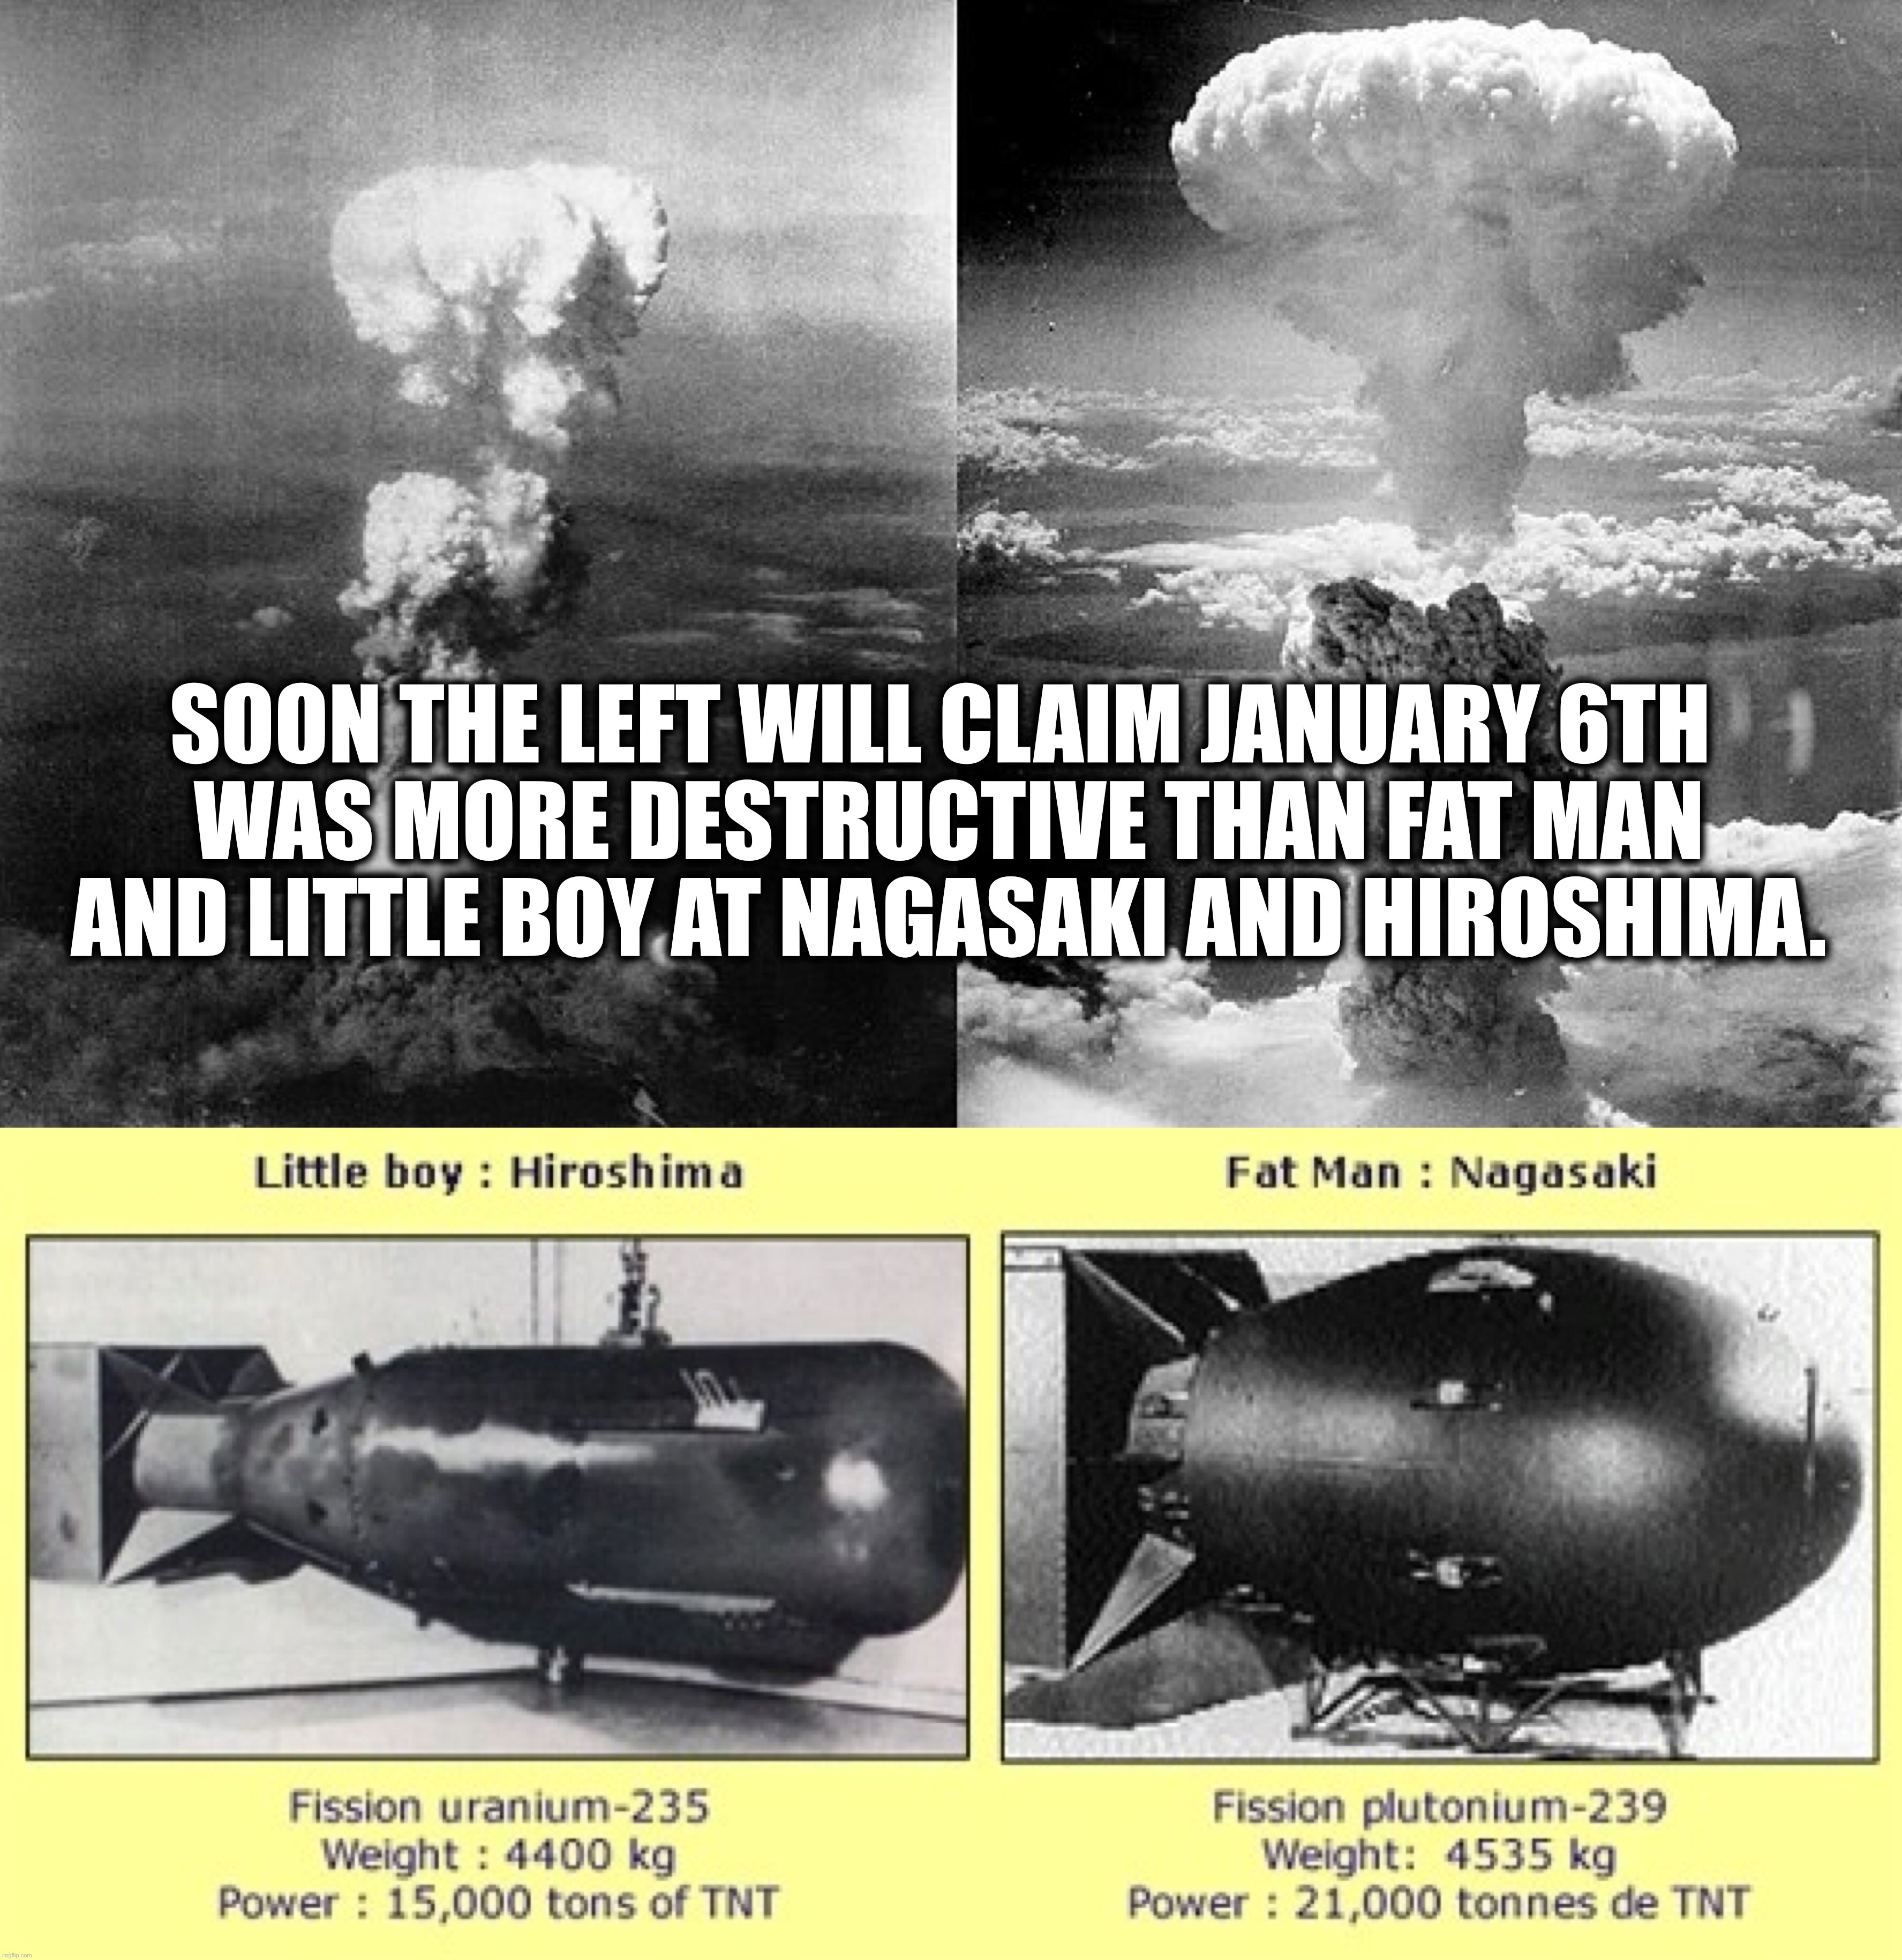 SOON THE LEFT WILL CLAIM JANUARY 6TH  WAS MORE DESTRUCTIVE THAN FAT MAN AND LITTLE BOY AT NAGASAKI AND HIROSHIMA. | image tagged in memes,political memes,democrats,new world order,deep state,fbi | made w/ Imgflip meme maker